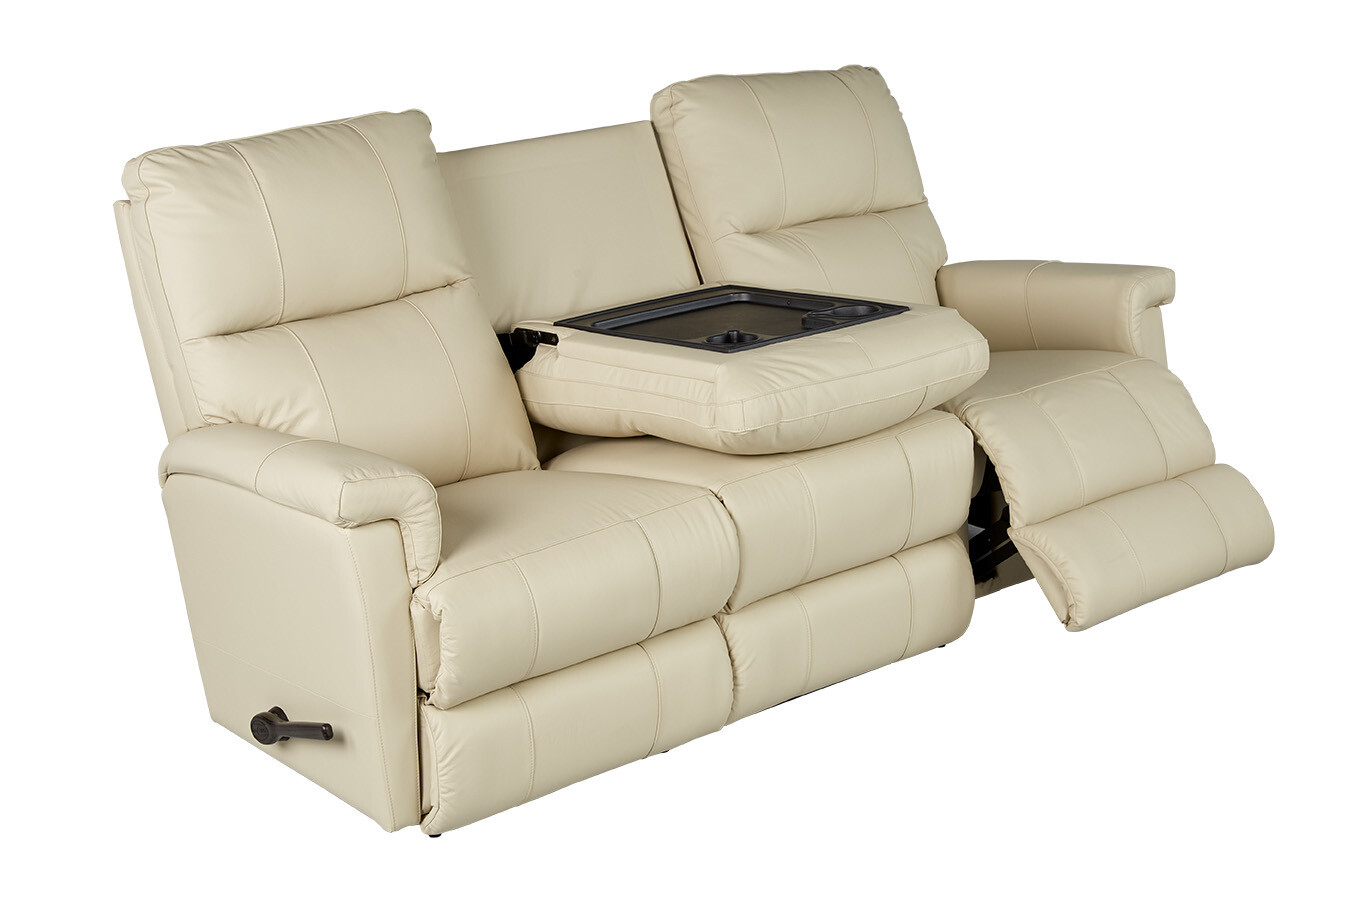 ETHAN Leather Reclining Sofa w/ Drop Down Table